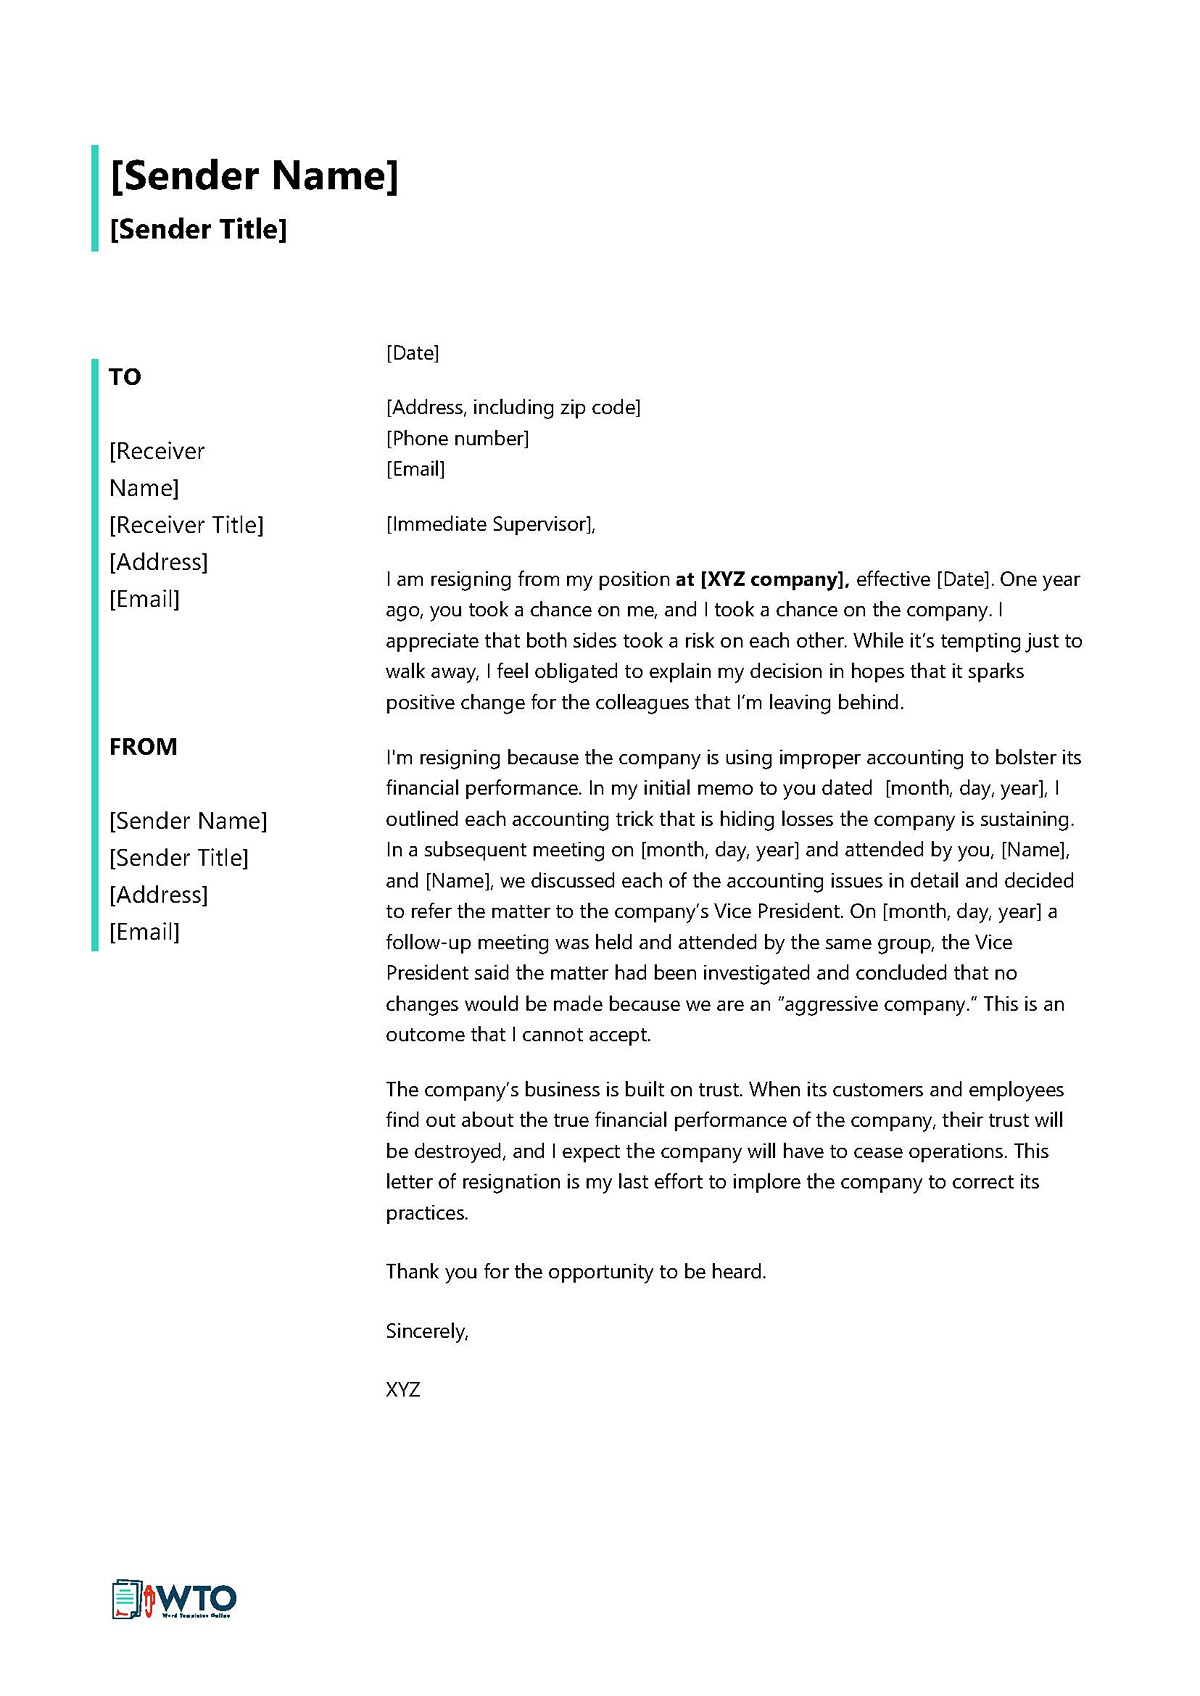 Downloadable Resignation Letter Template - Word Format (Job Not a Good Fit)